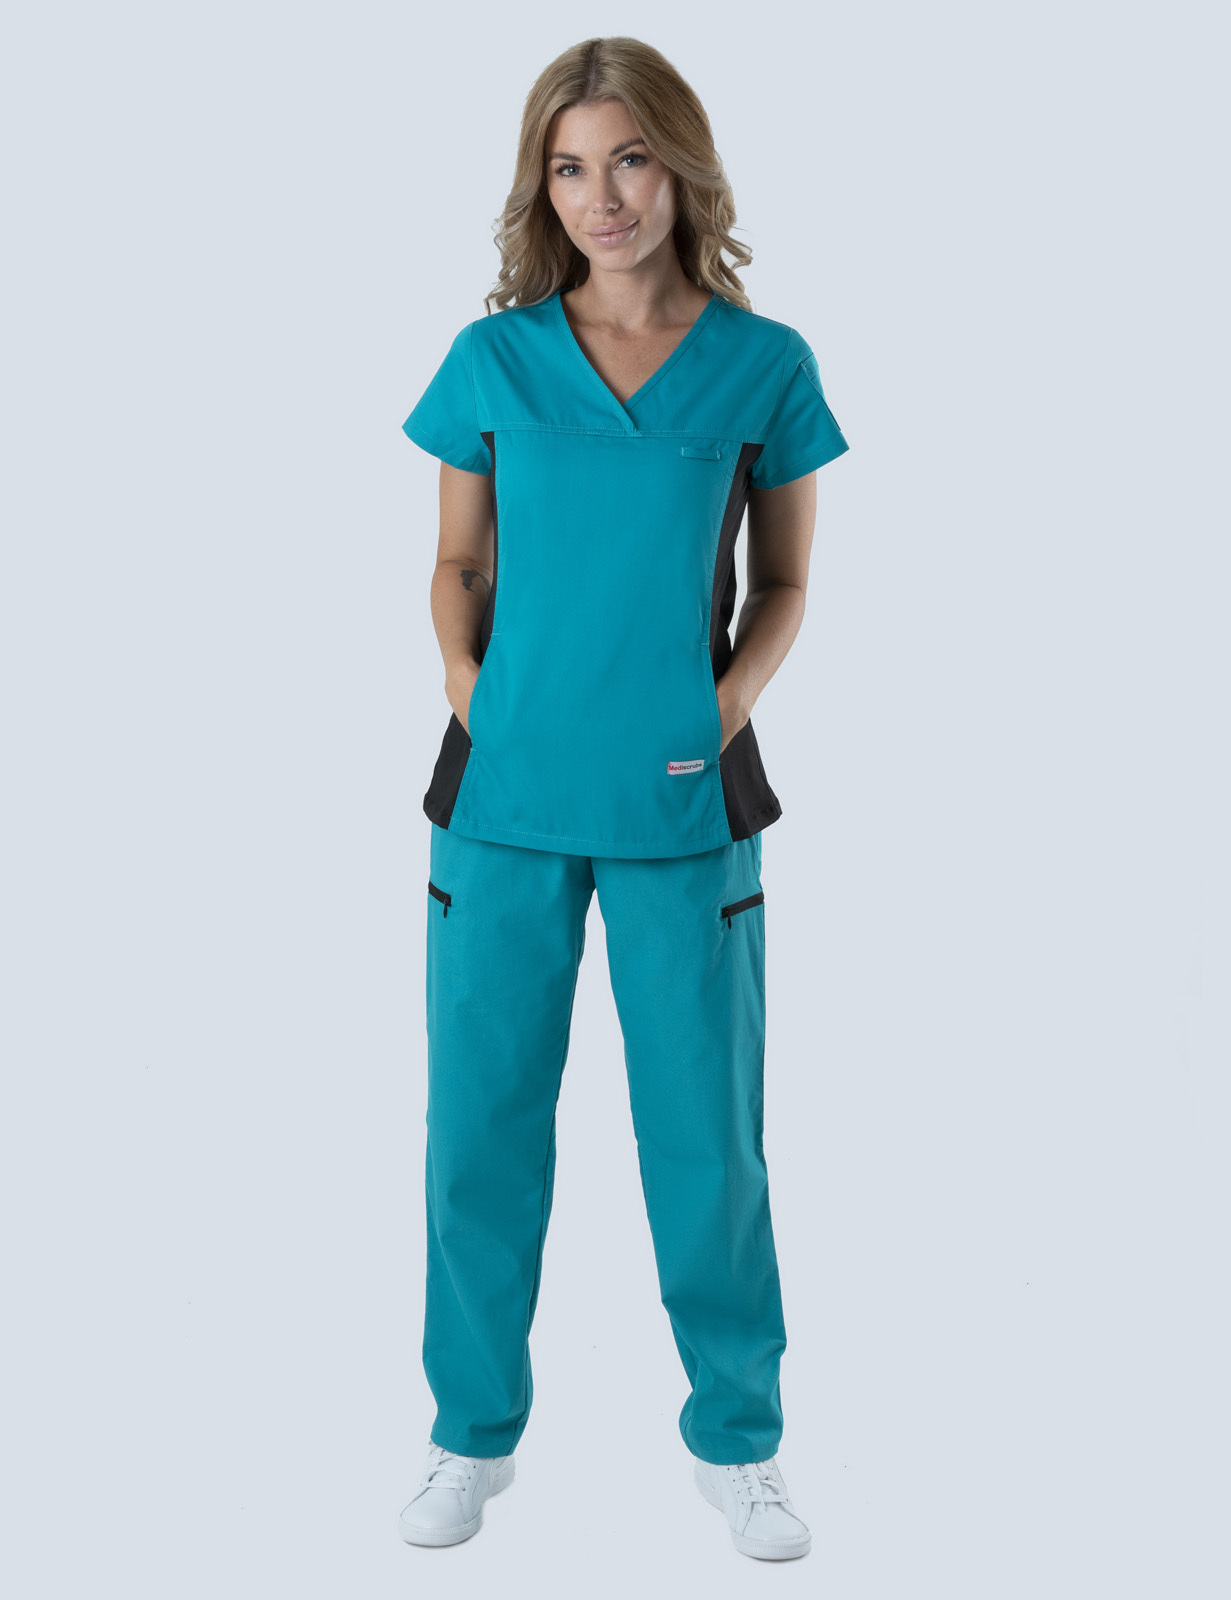 Women's Fit Solid Scrub Top With Spandex Panel - Teal - X Large